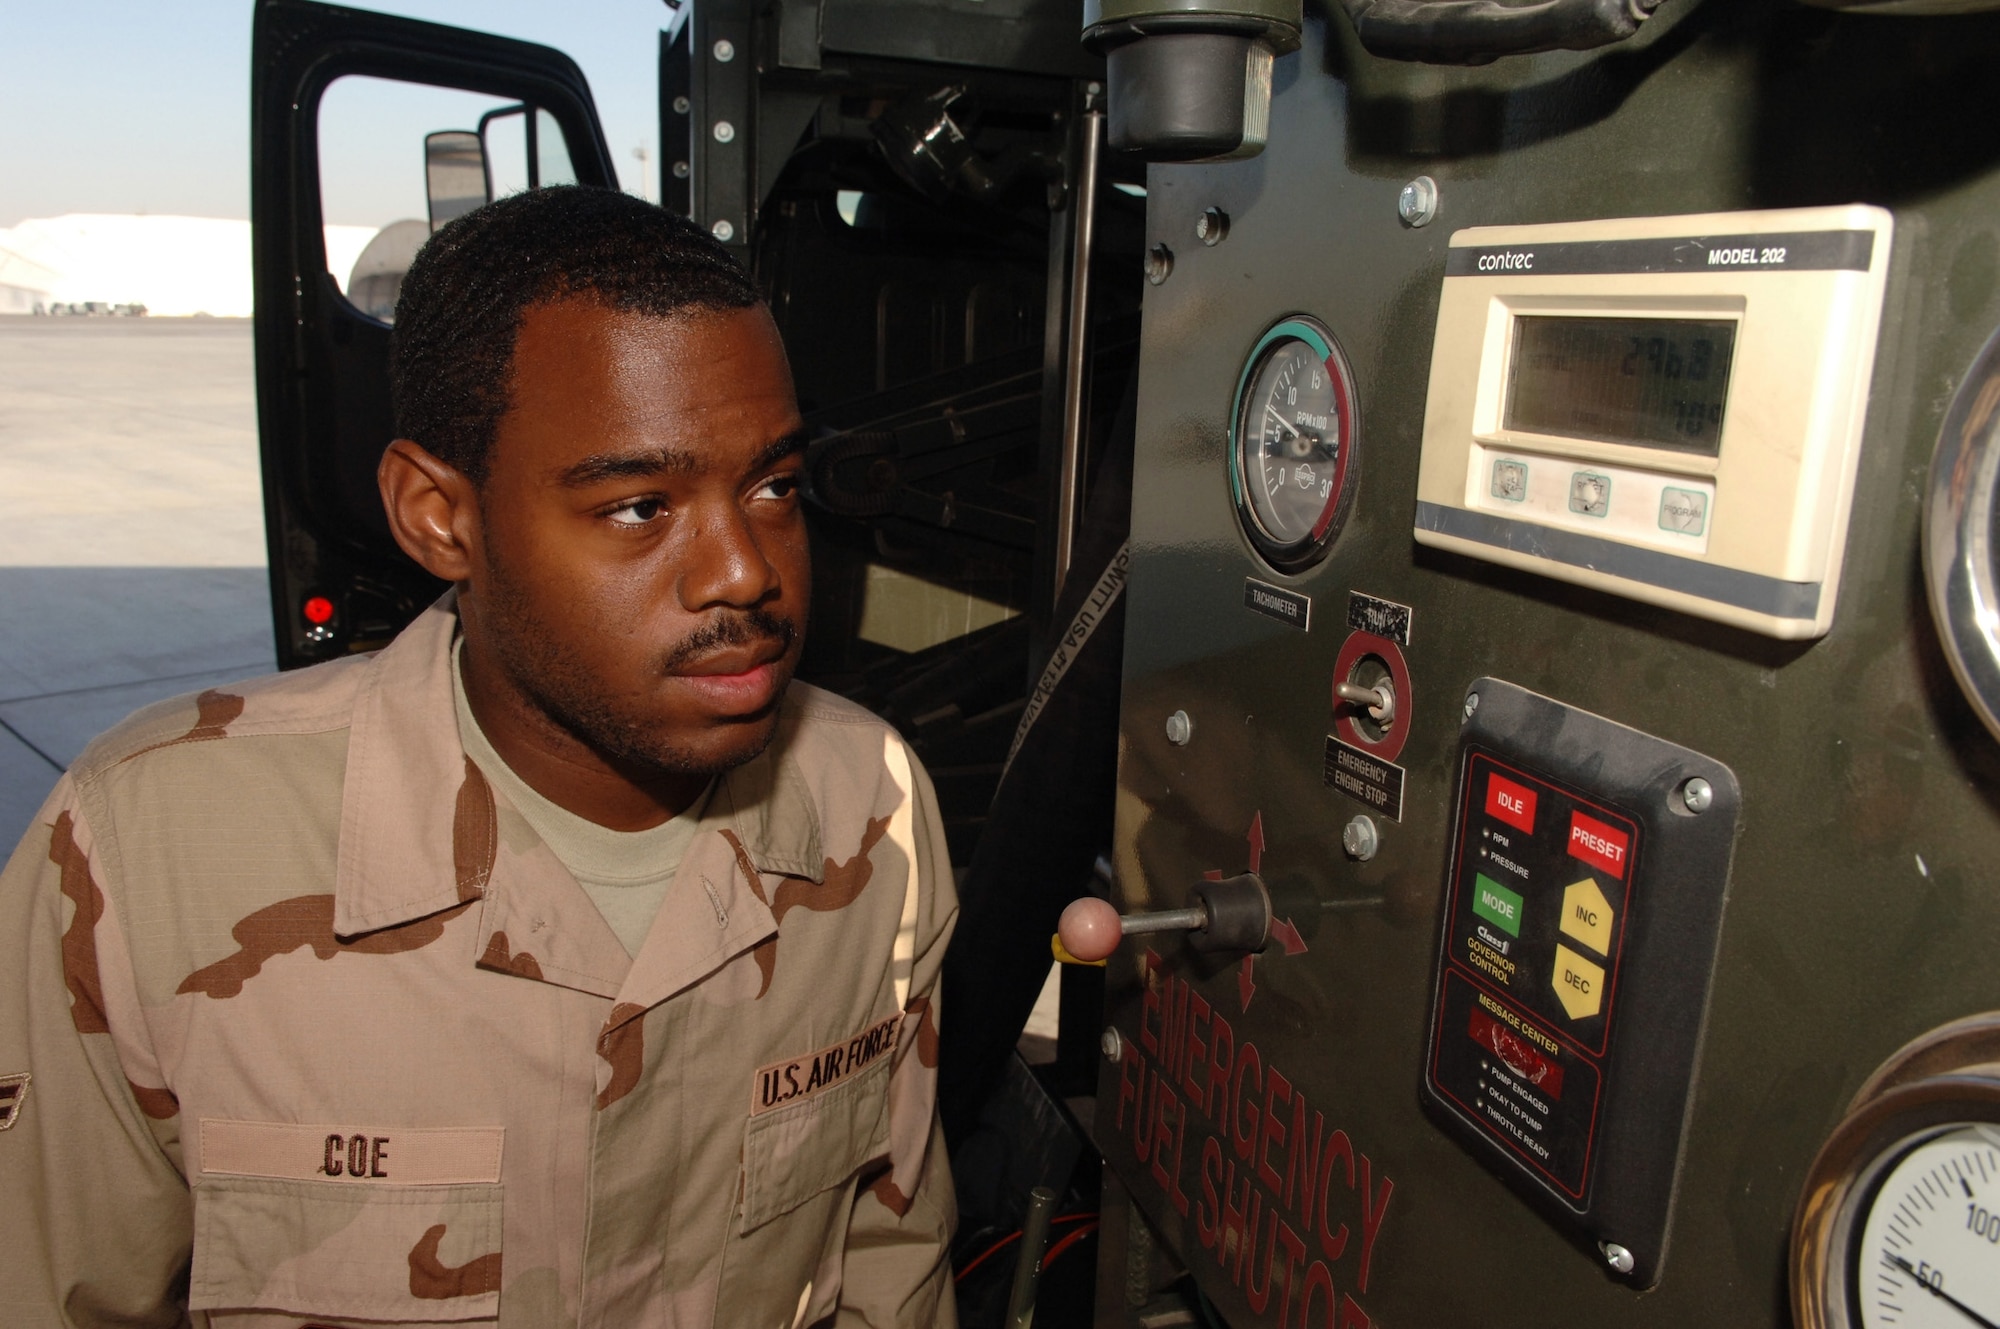 Airman 1st Class Zechariah Coe, fuels distribution operator, 380th Expeditionary Logistics Readiness Squadron watches the counter for JP-8 jet fuel being pumped into a KC-10 Extender as he breaks the Air Force record for the largest amount of fuel pumped in a month, Southwest Asia, Monday, February 25, 2008. Airman Coe took on every refueling opportunity he could to pump the more than 3,573,989 gallons of fuel that was required to break the previous record.
